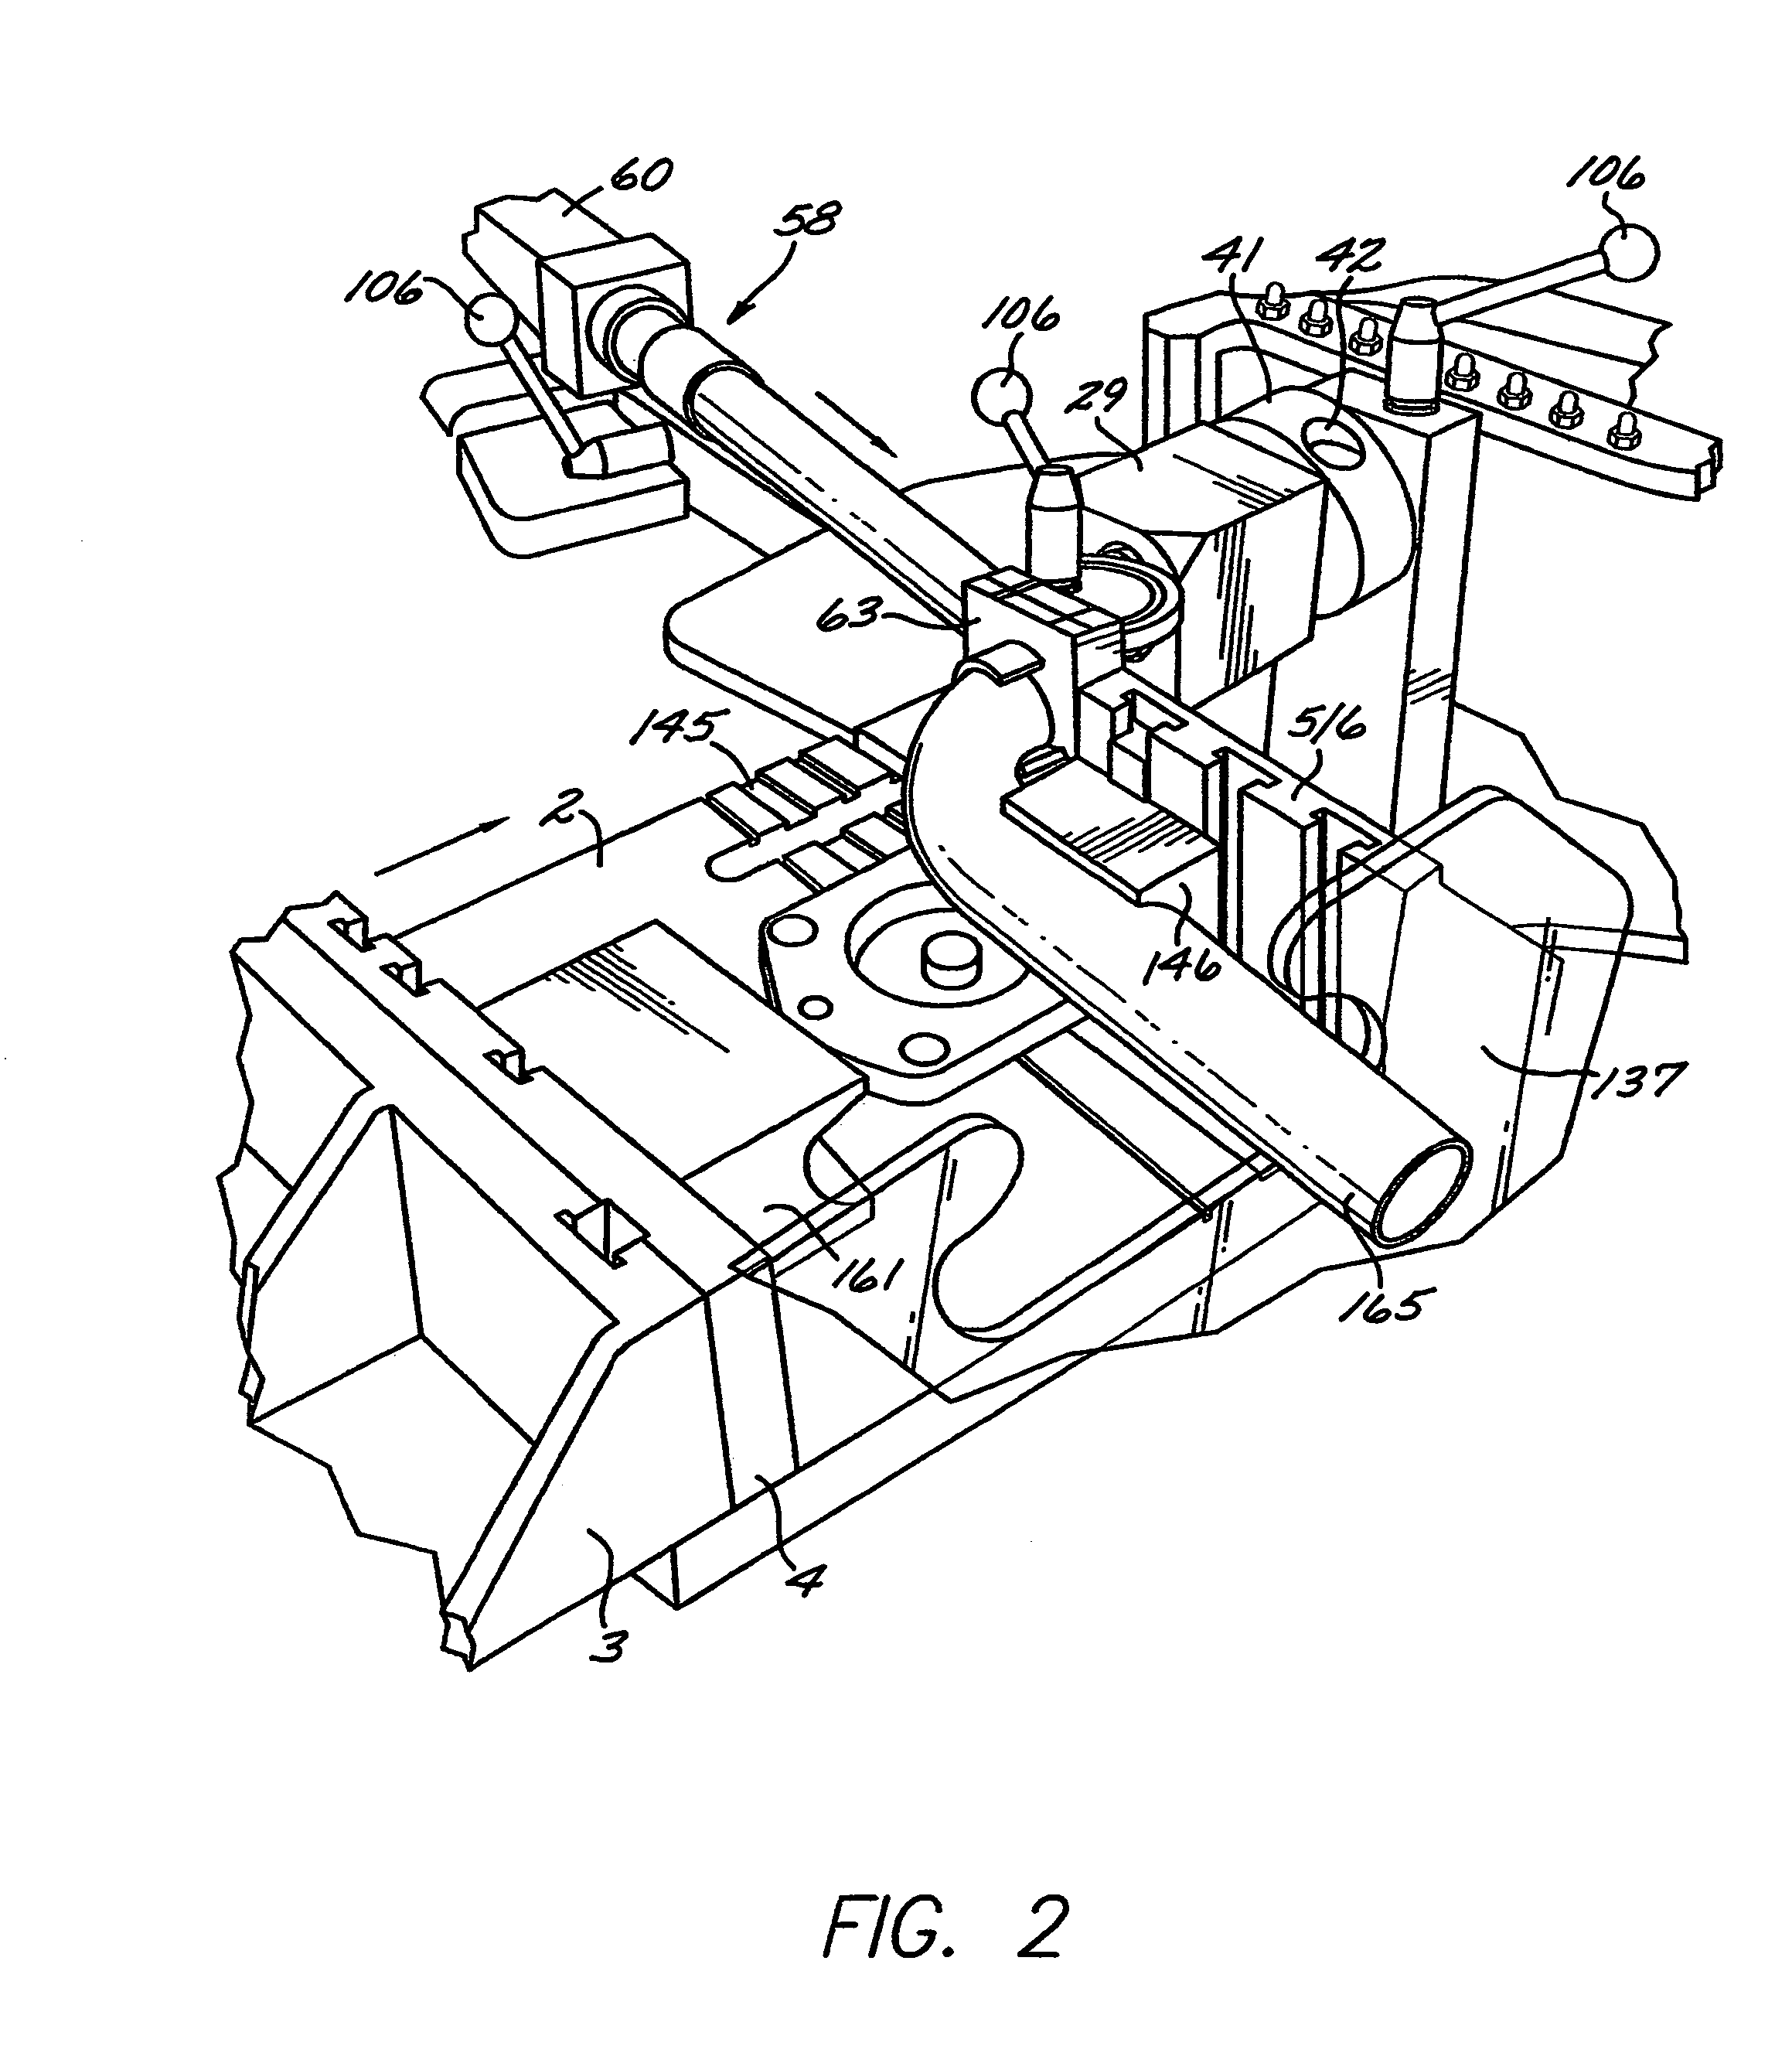 Tube end forming and coping method and apparatus